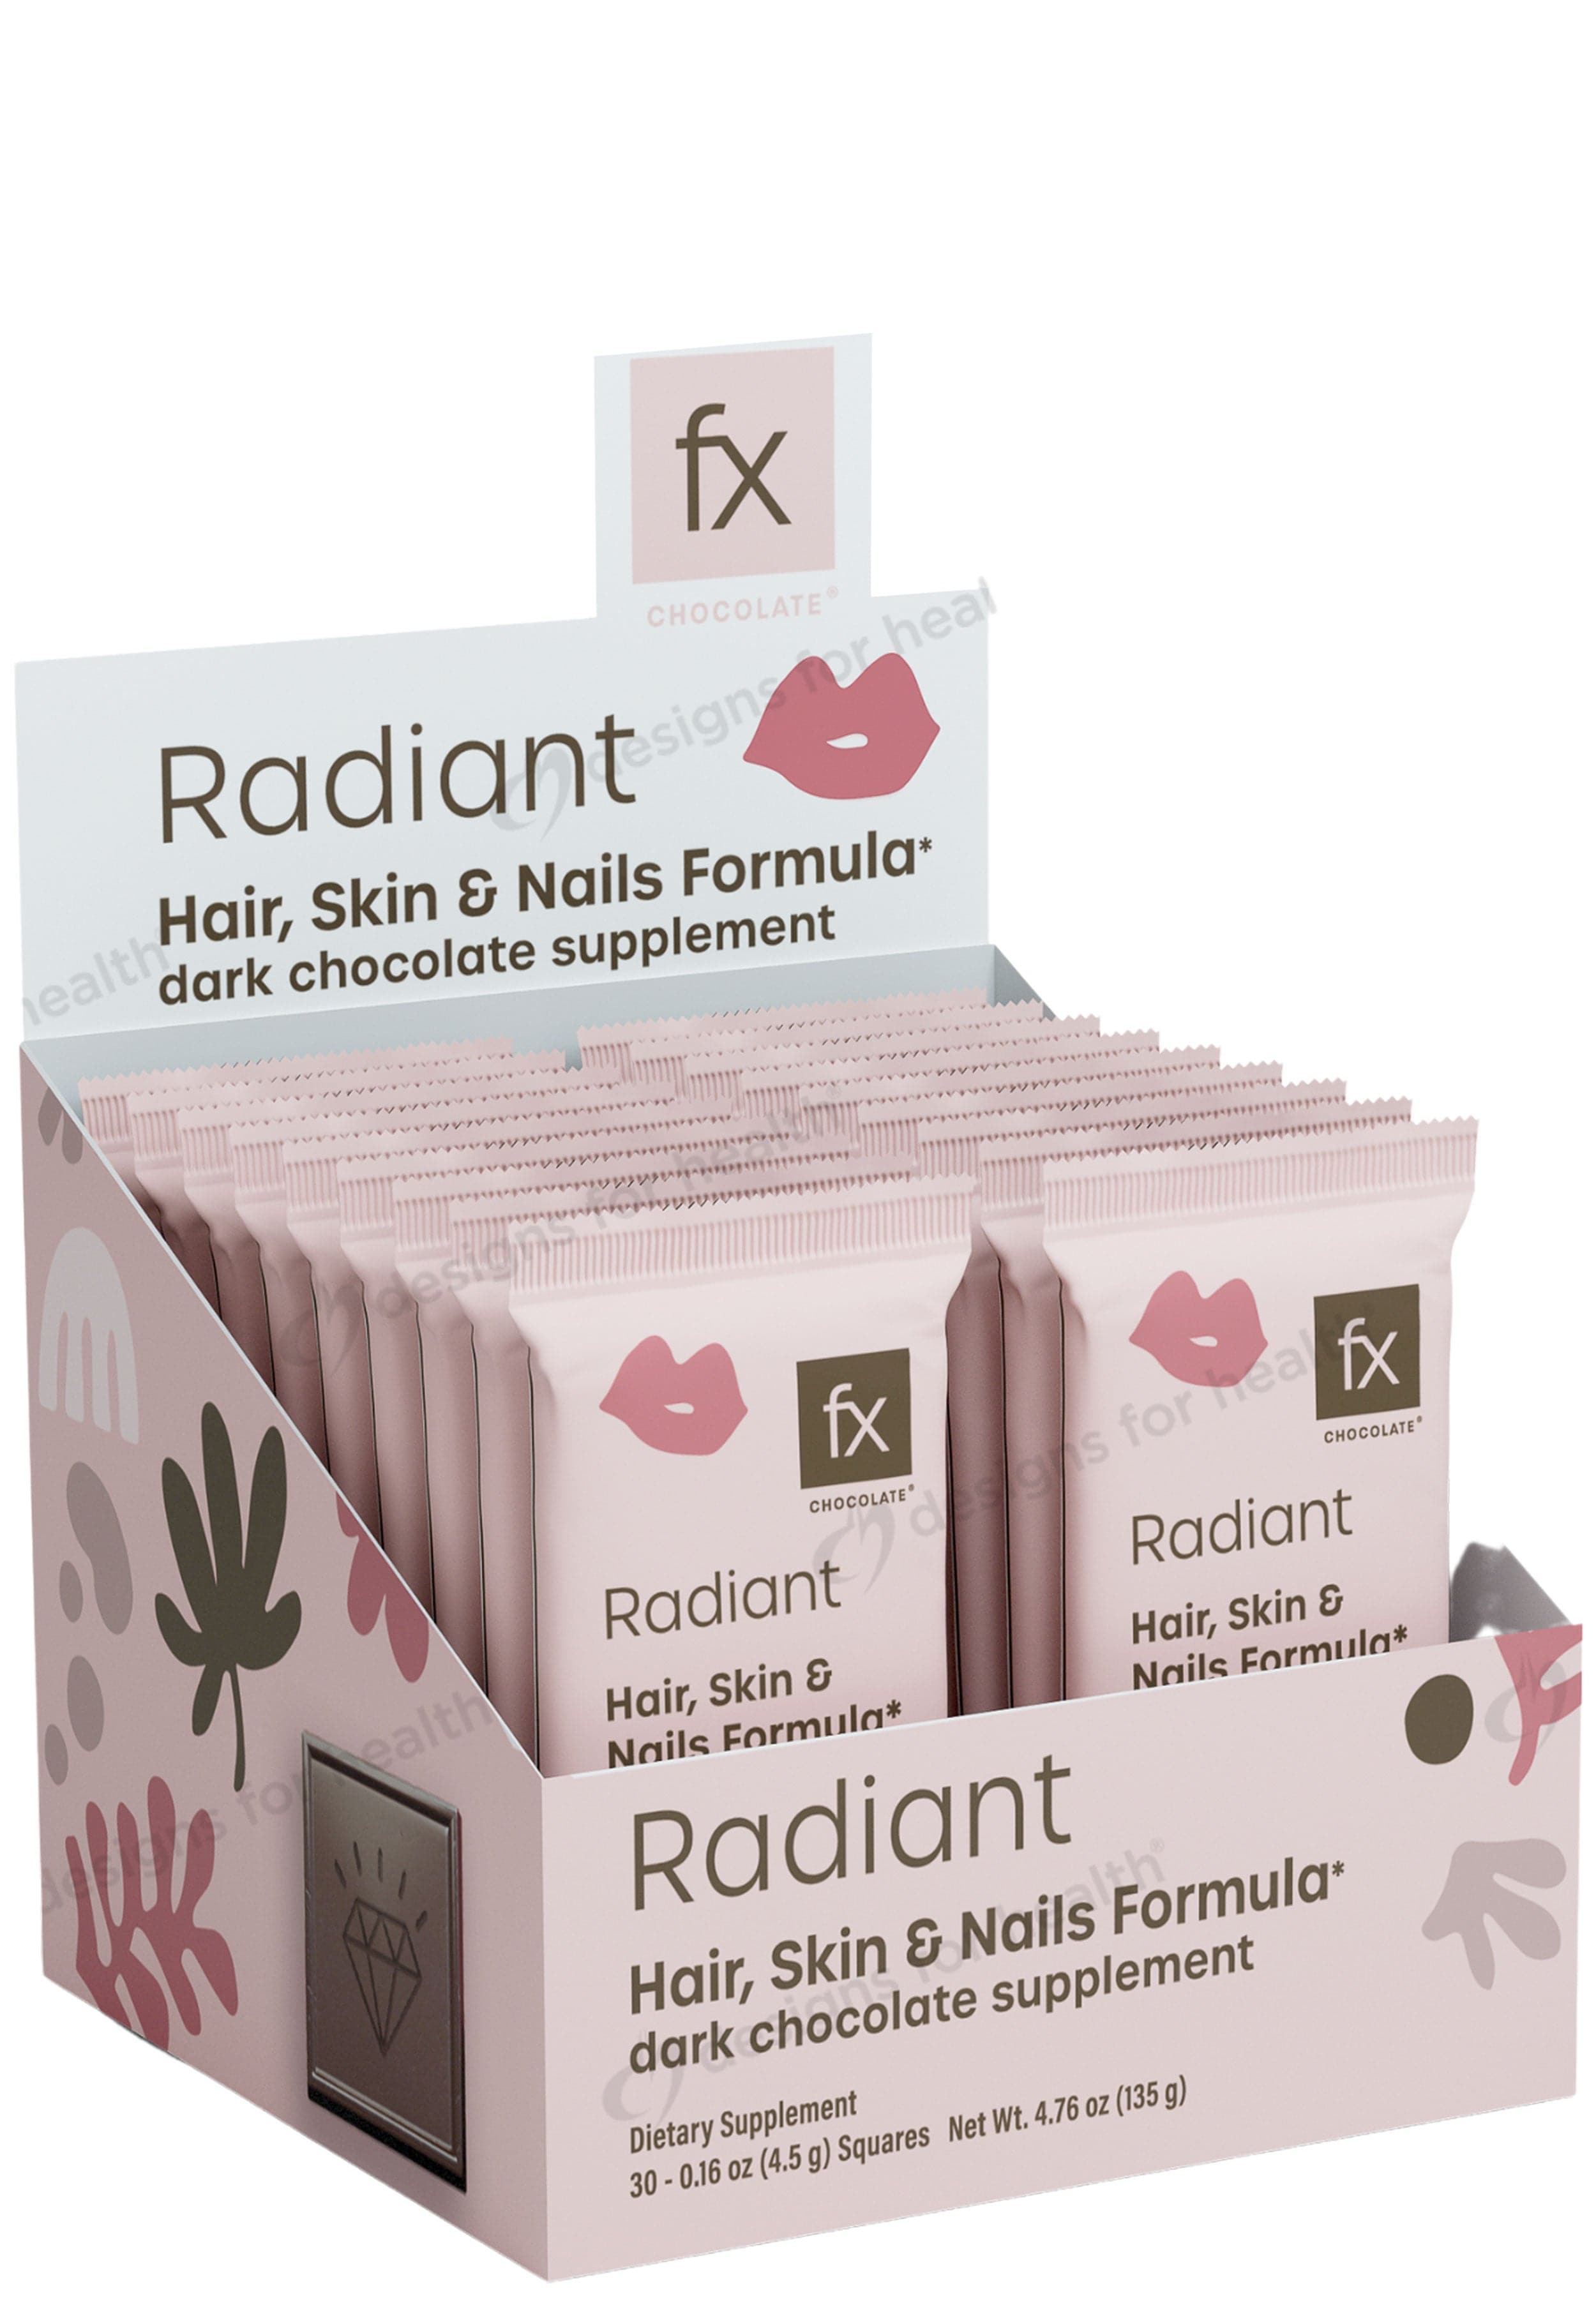 Designs for Health FX Chocolate Radiant 